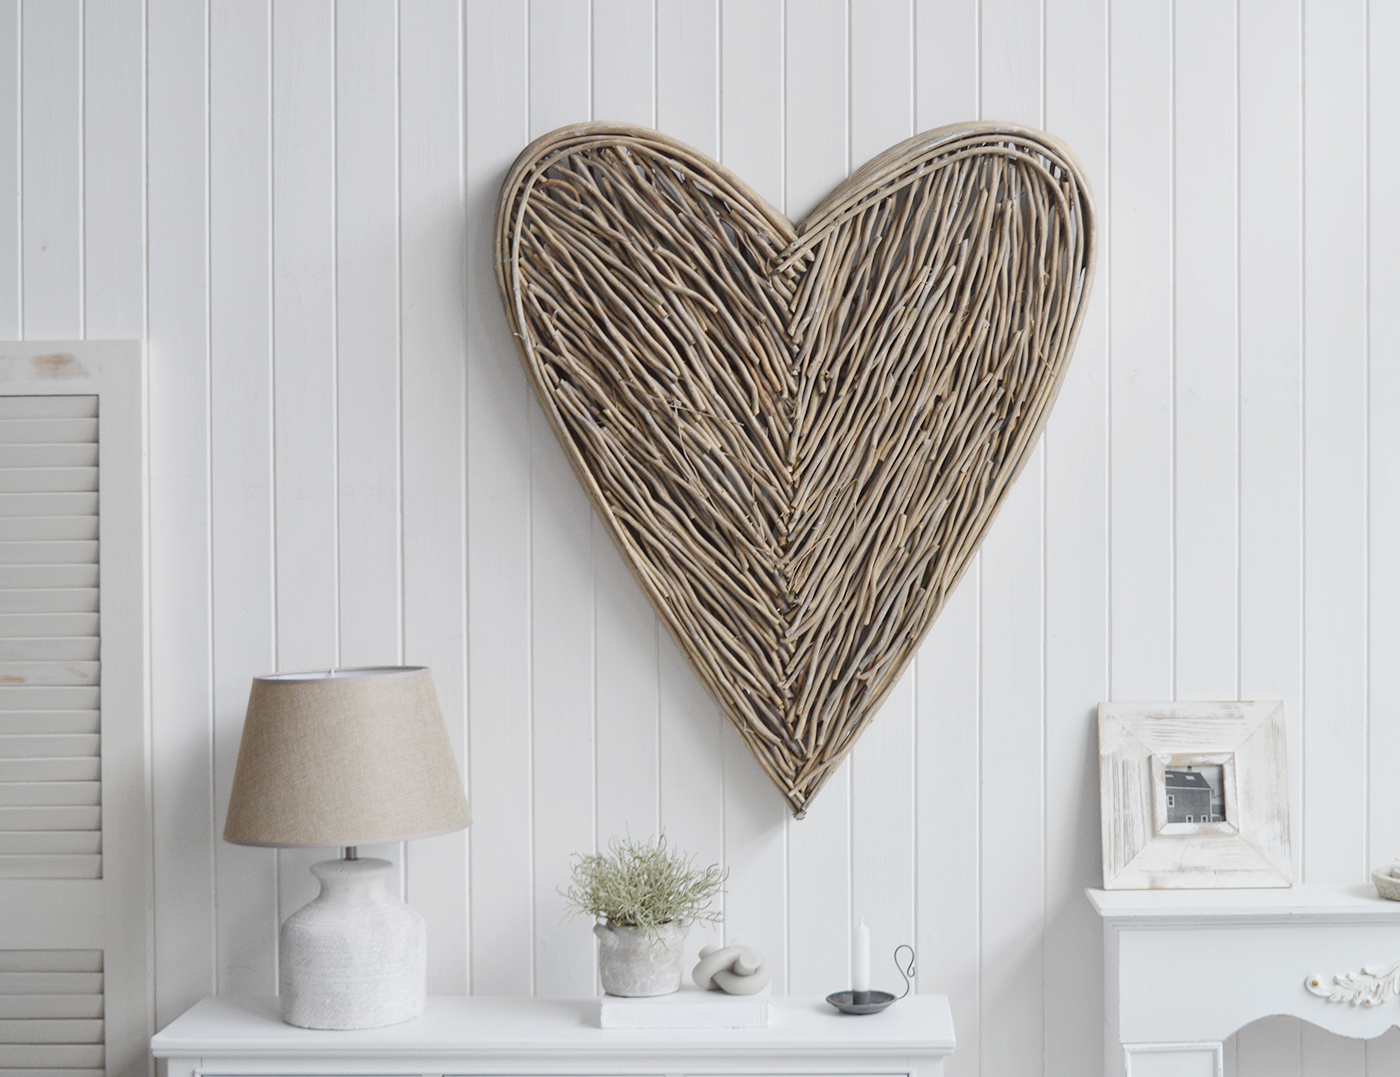 Large rustic grey willow heart wreath for New England country cottage and coastal homes and interiors